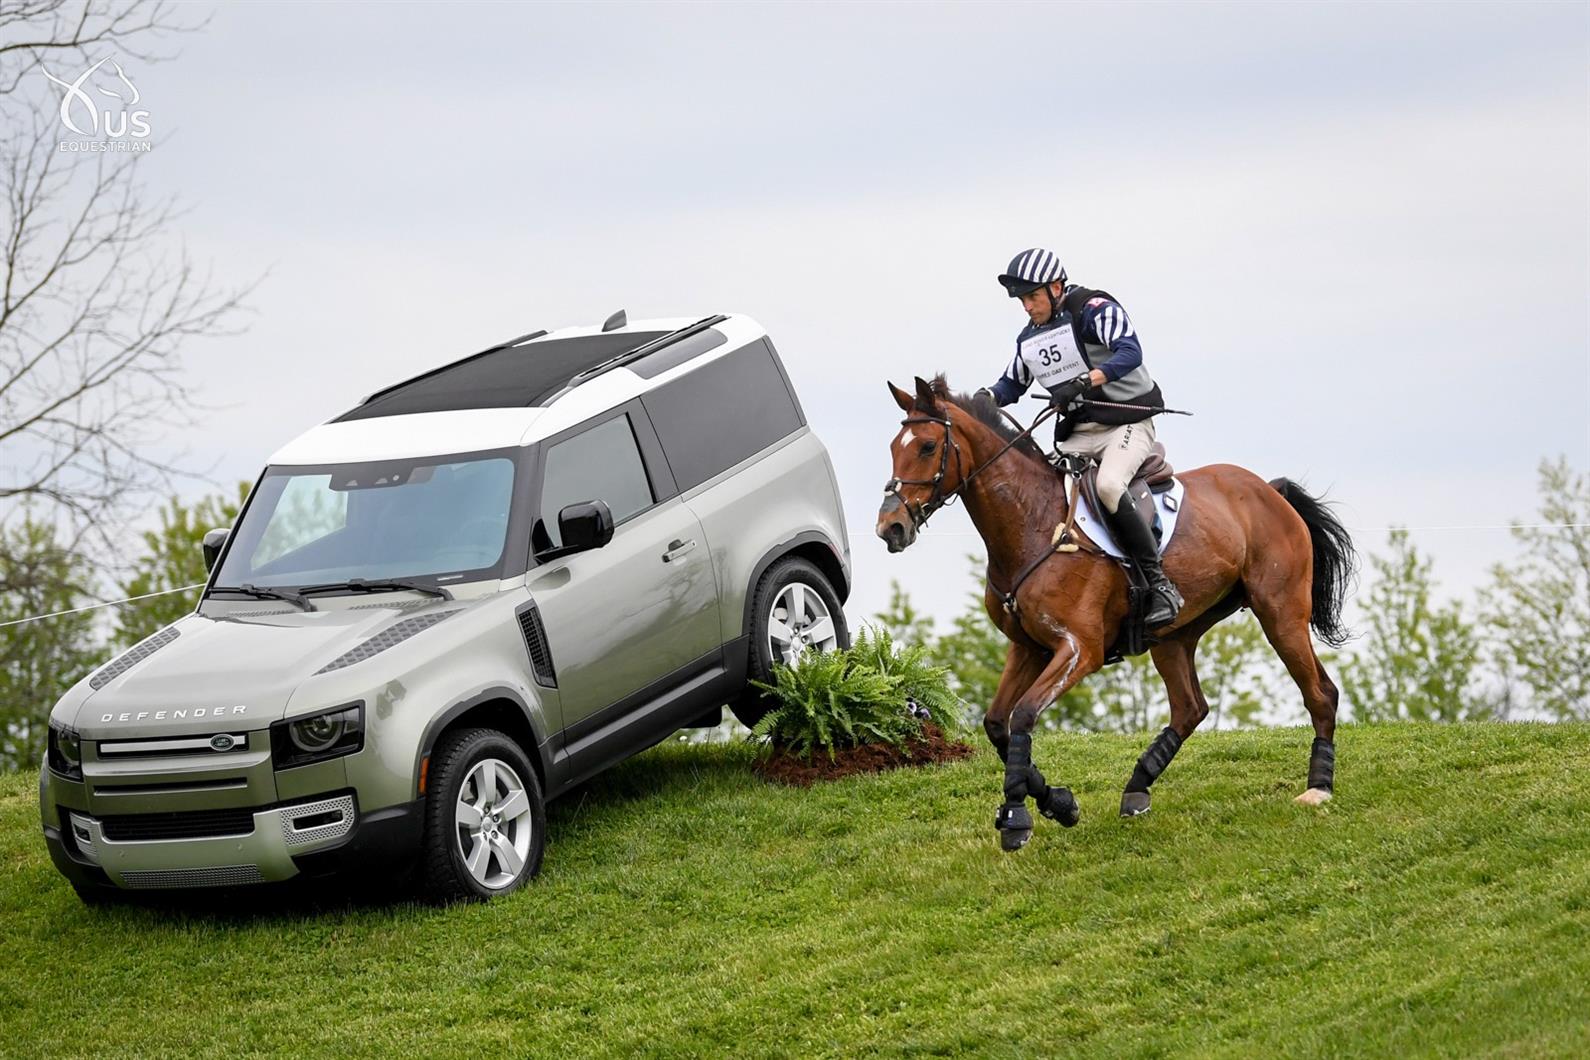 Oliver Townend and Ballaghmor Heading Second presented Final Day 2021 in Cue Event Lead Boyd Take On Over into MARS Rover of by and Martin Land Class Place Hold Three-Day Equestrian™; Kentucky